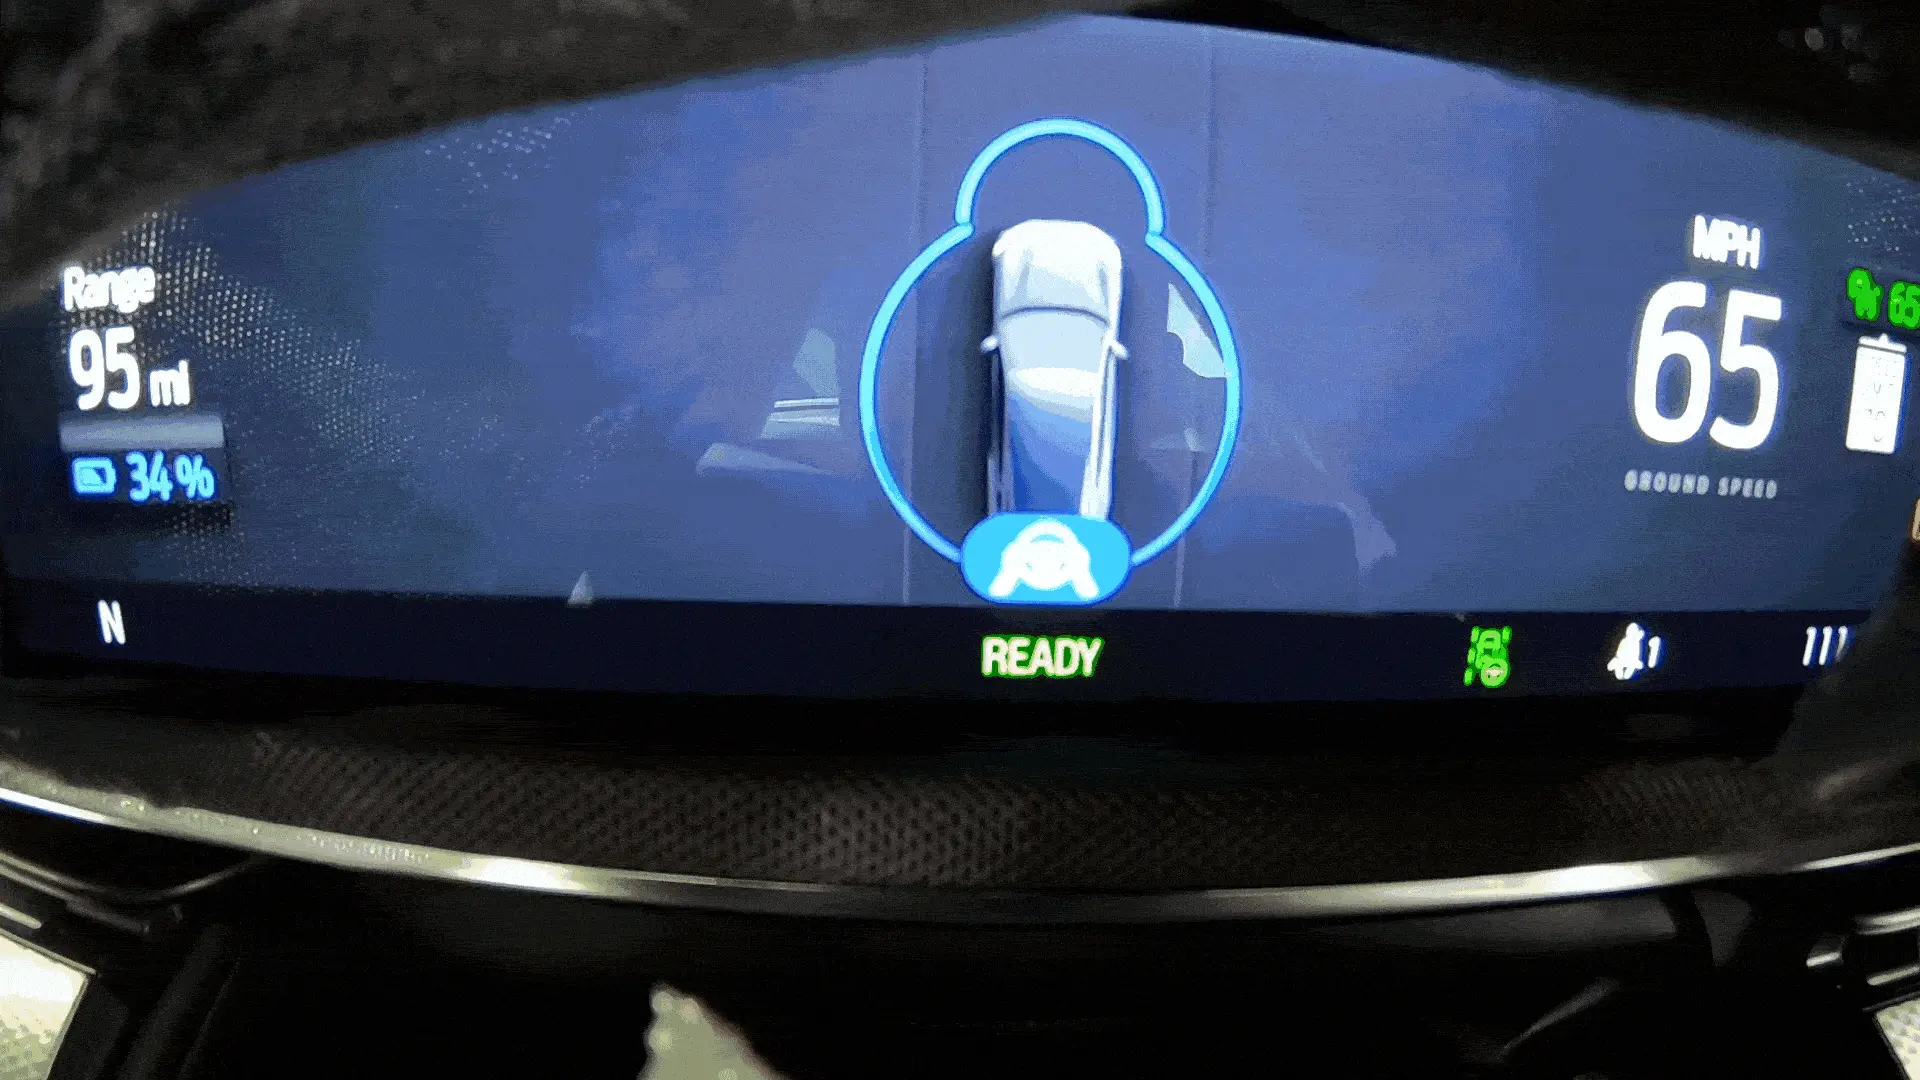  Ford BlueCruise 1.3 Improves Hands-Free Driving With New Features, Launches On Mustang Mach-E